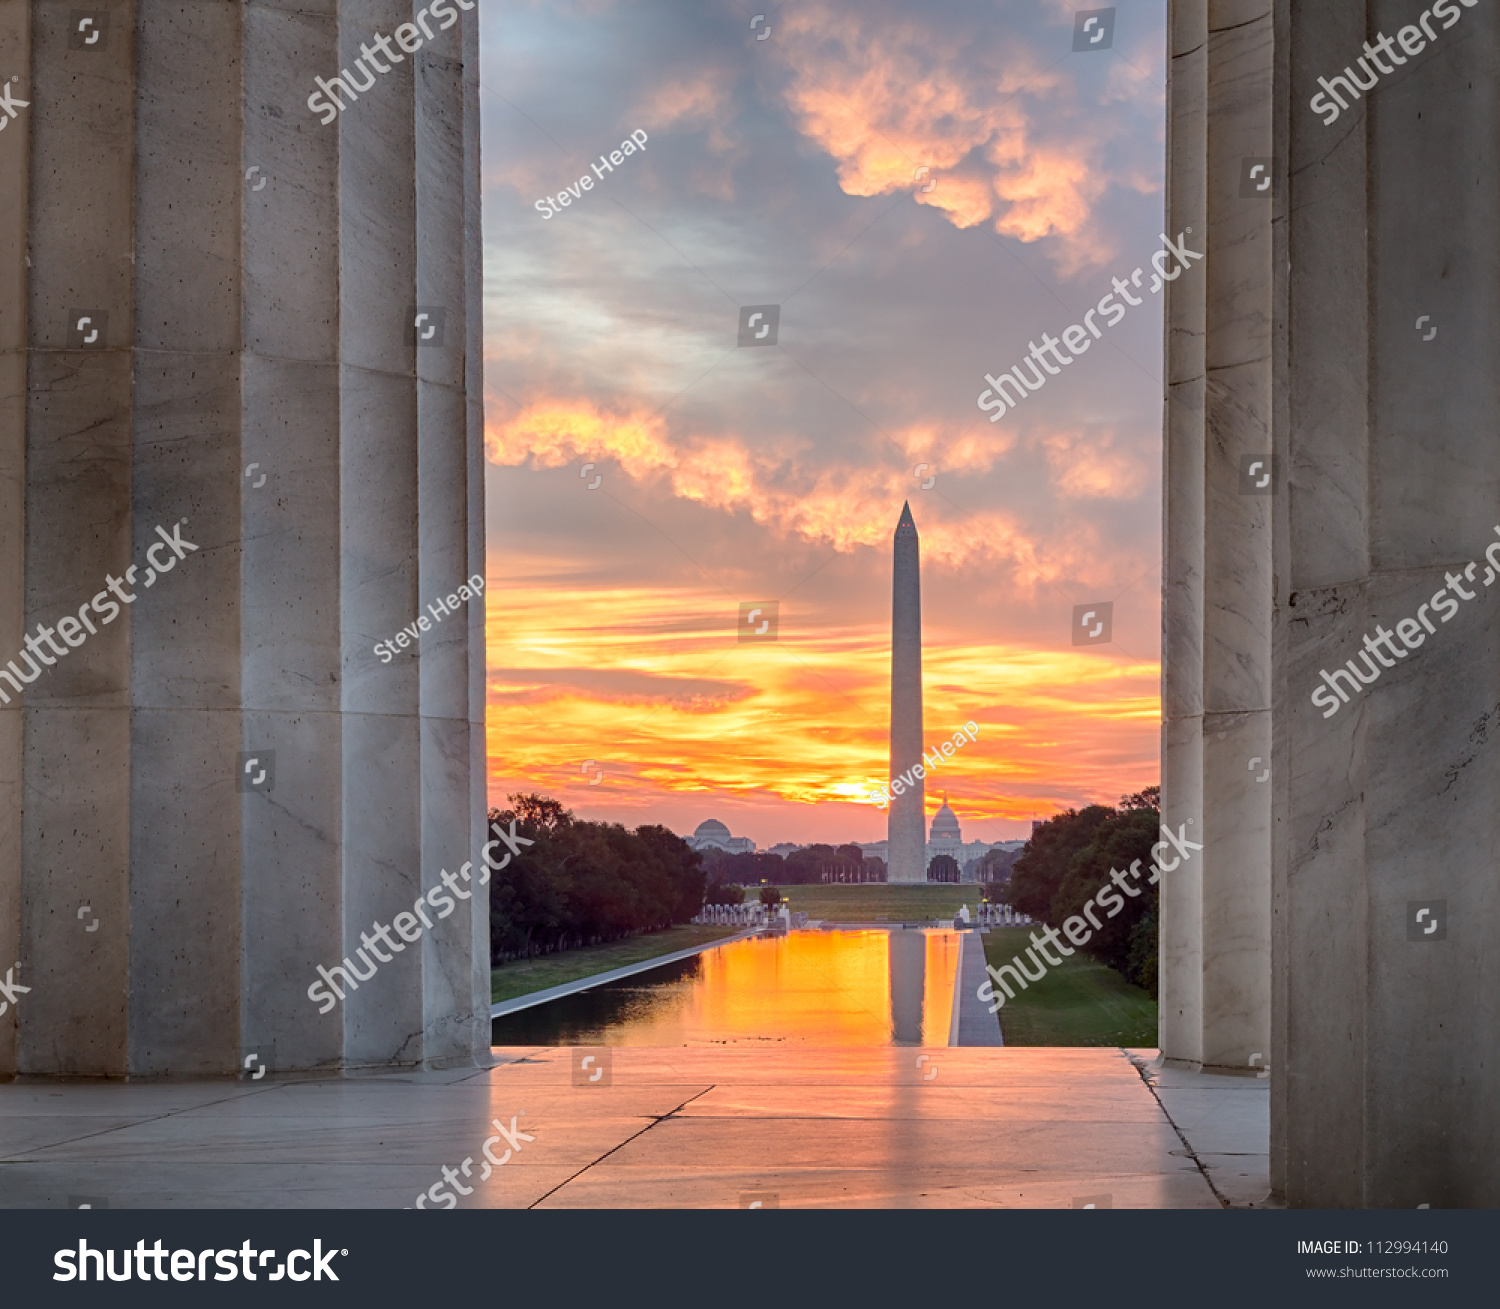 Bright red and orange sunrise at dawn reflects Washington Monument in new reflecting pool by Lincoln Memorial #112994140